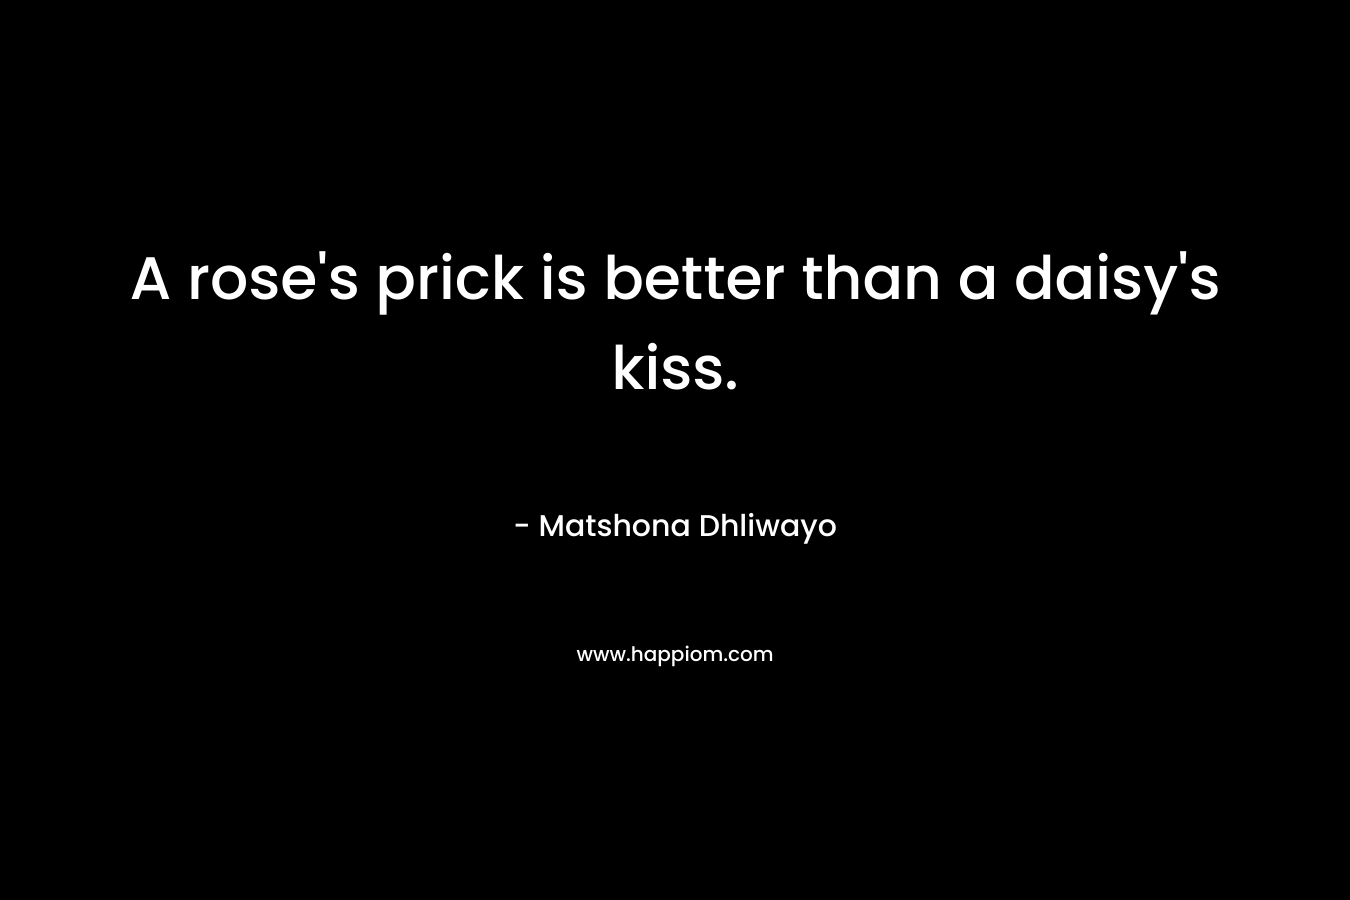 A rose’s prick is better than a daisy’s kiss. – Matshona Dhliwayo